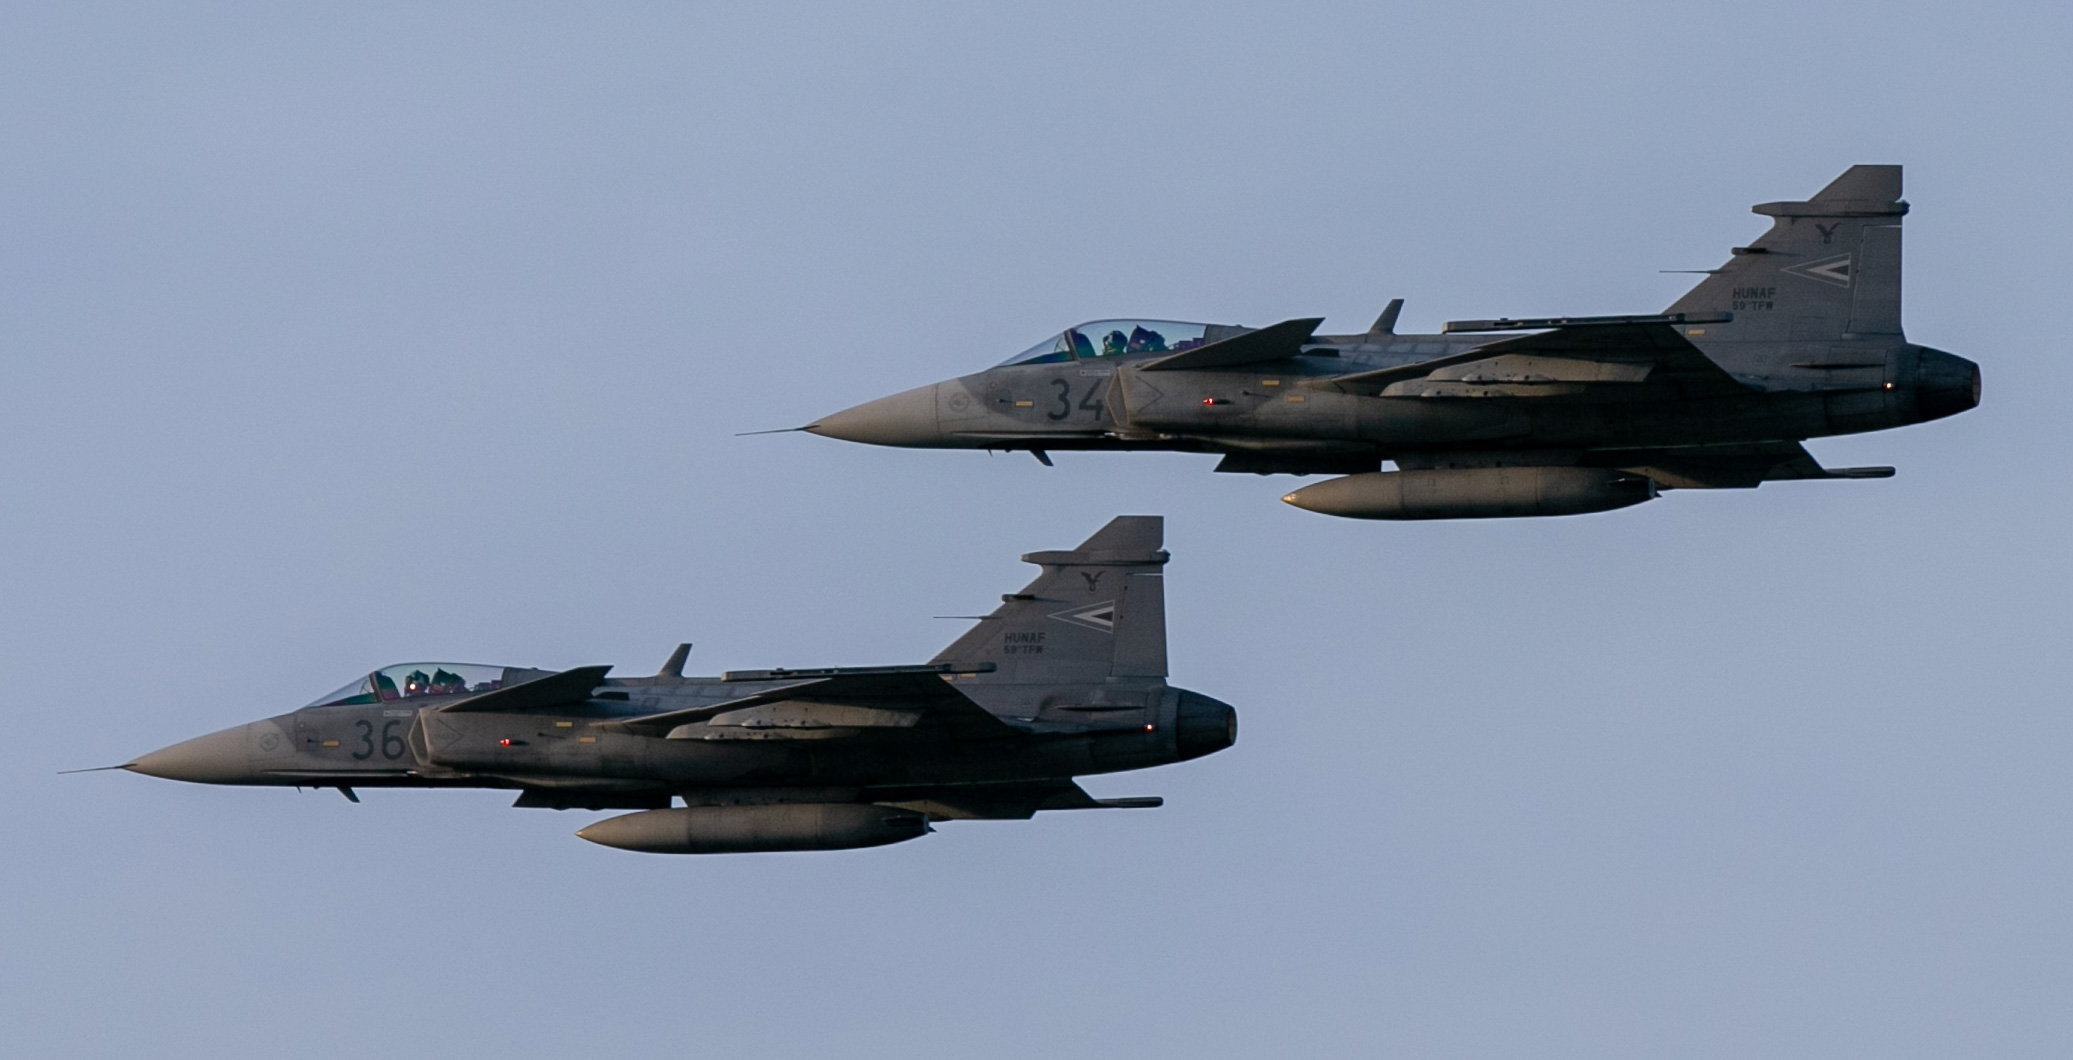 Hungarian Gripens Scrambled after Bomb Threat Made on Turkish Aircraft